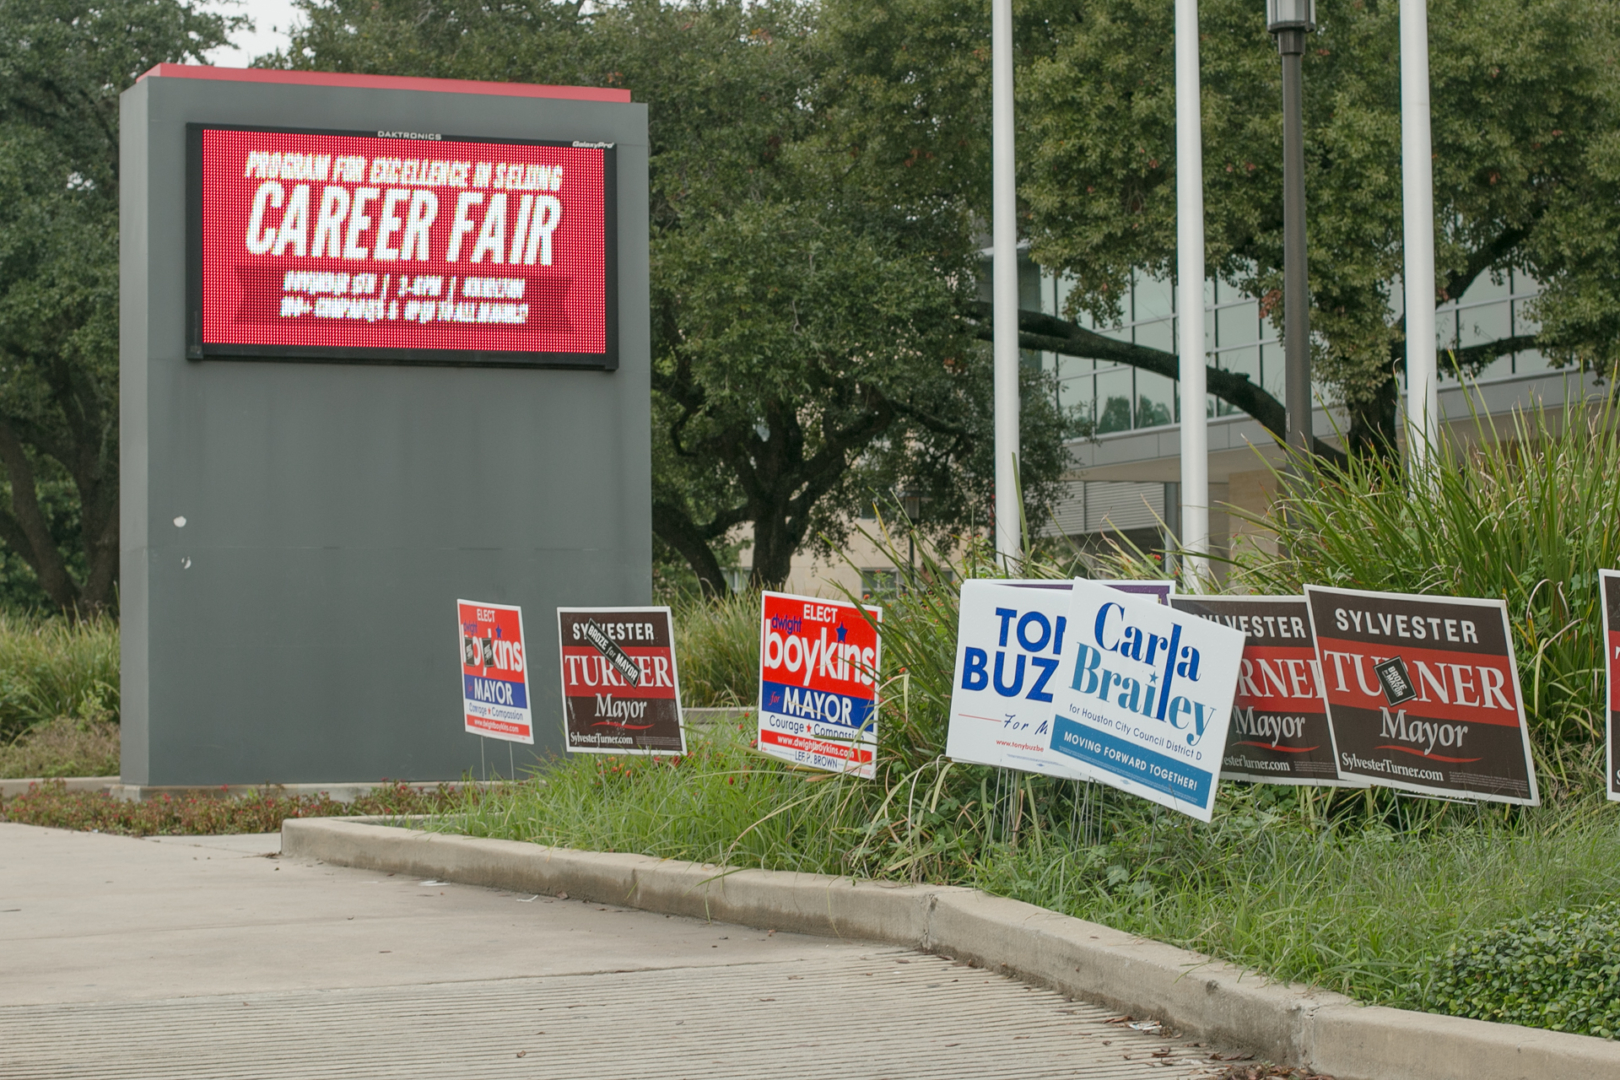 For Houston’s mayoral election, incumbent Sylvester Turner and trial lawyer Tony Buzbee will face each other in a December runoff. | Lino Sandil/The Cougar